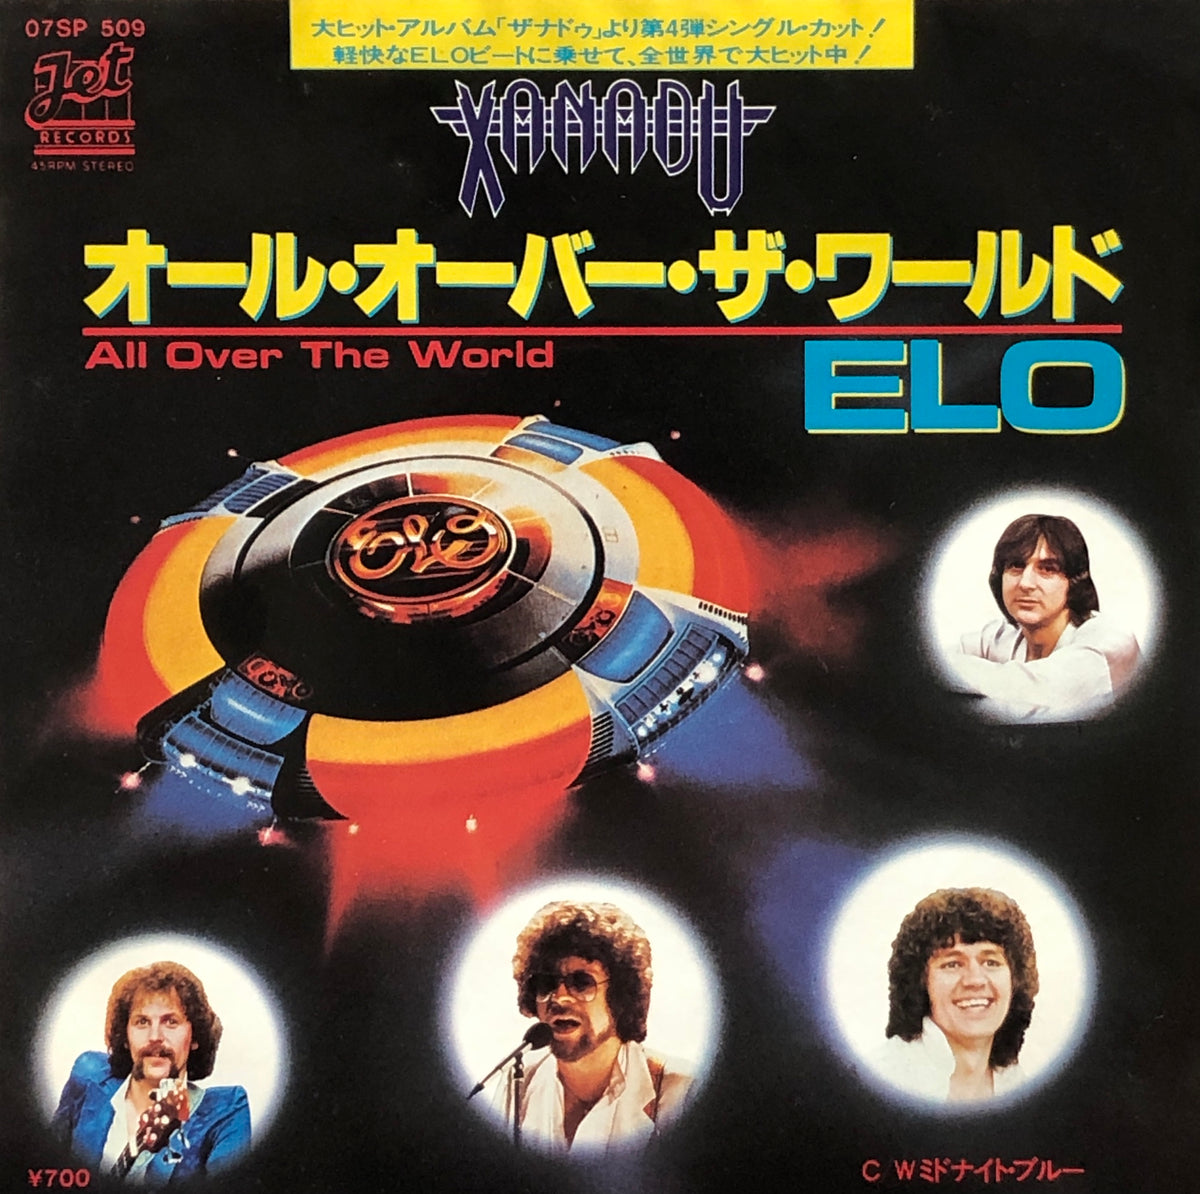 ELECTRIC LIGHT ORCHESTRA (ELO) / All Over The World (07SP 509) – TICRO  MARKET